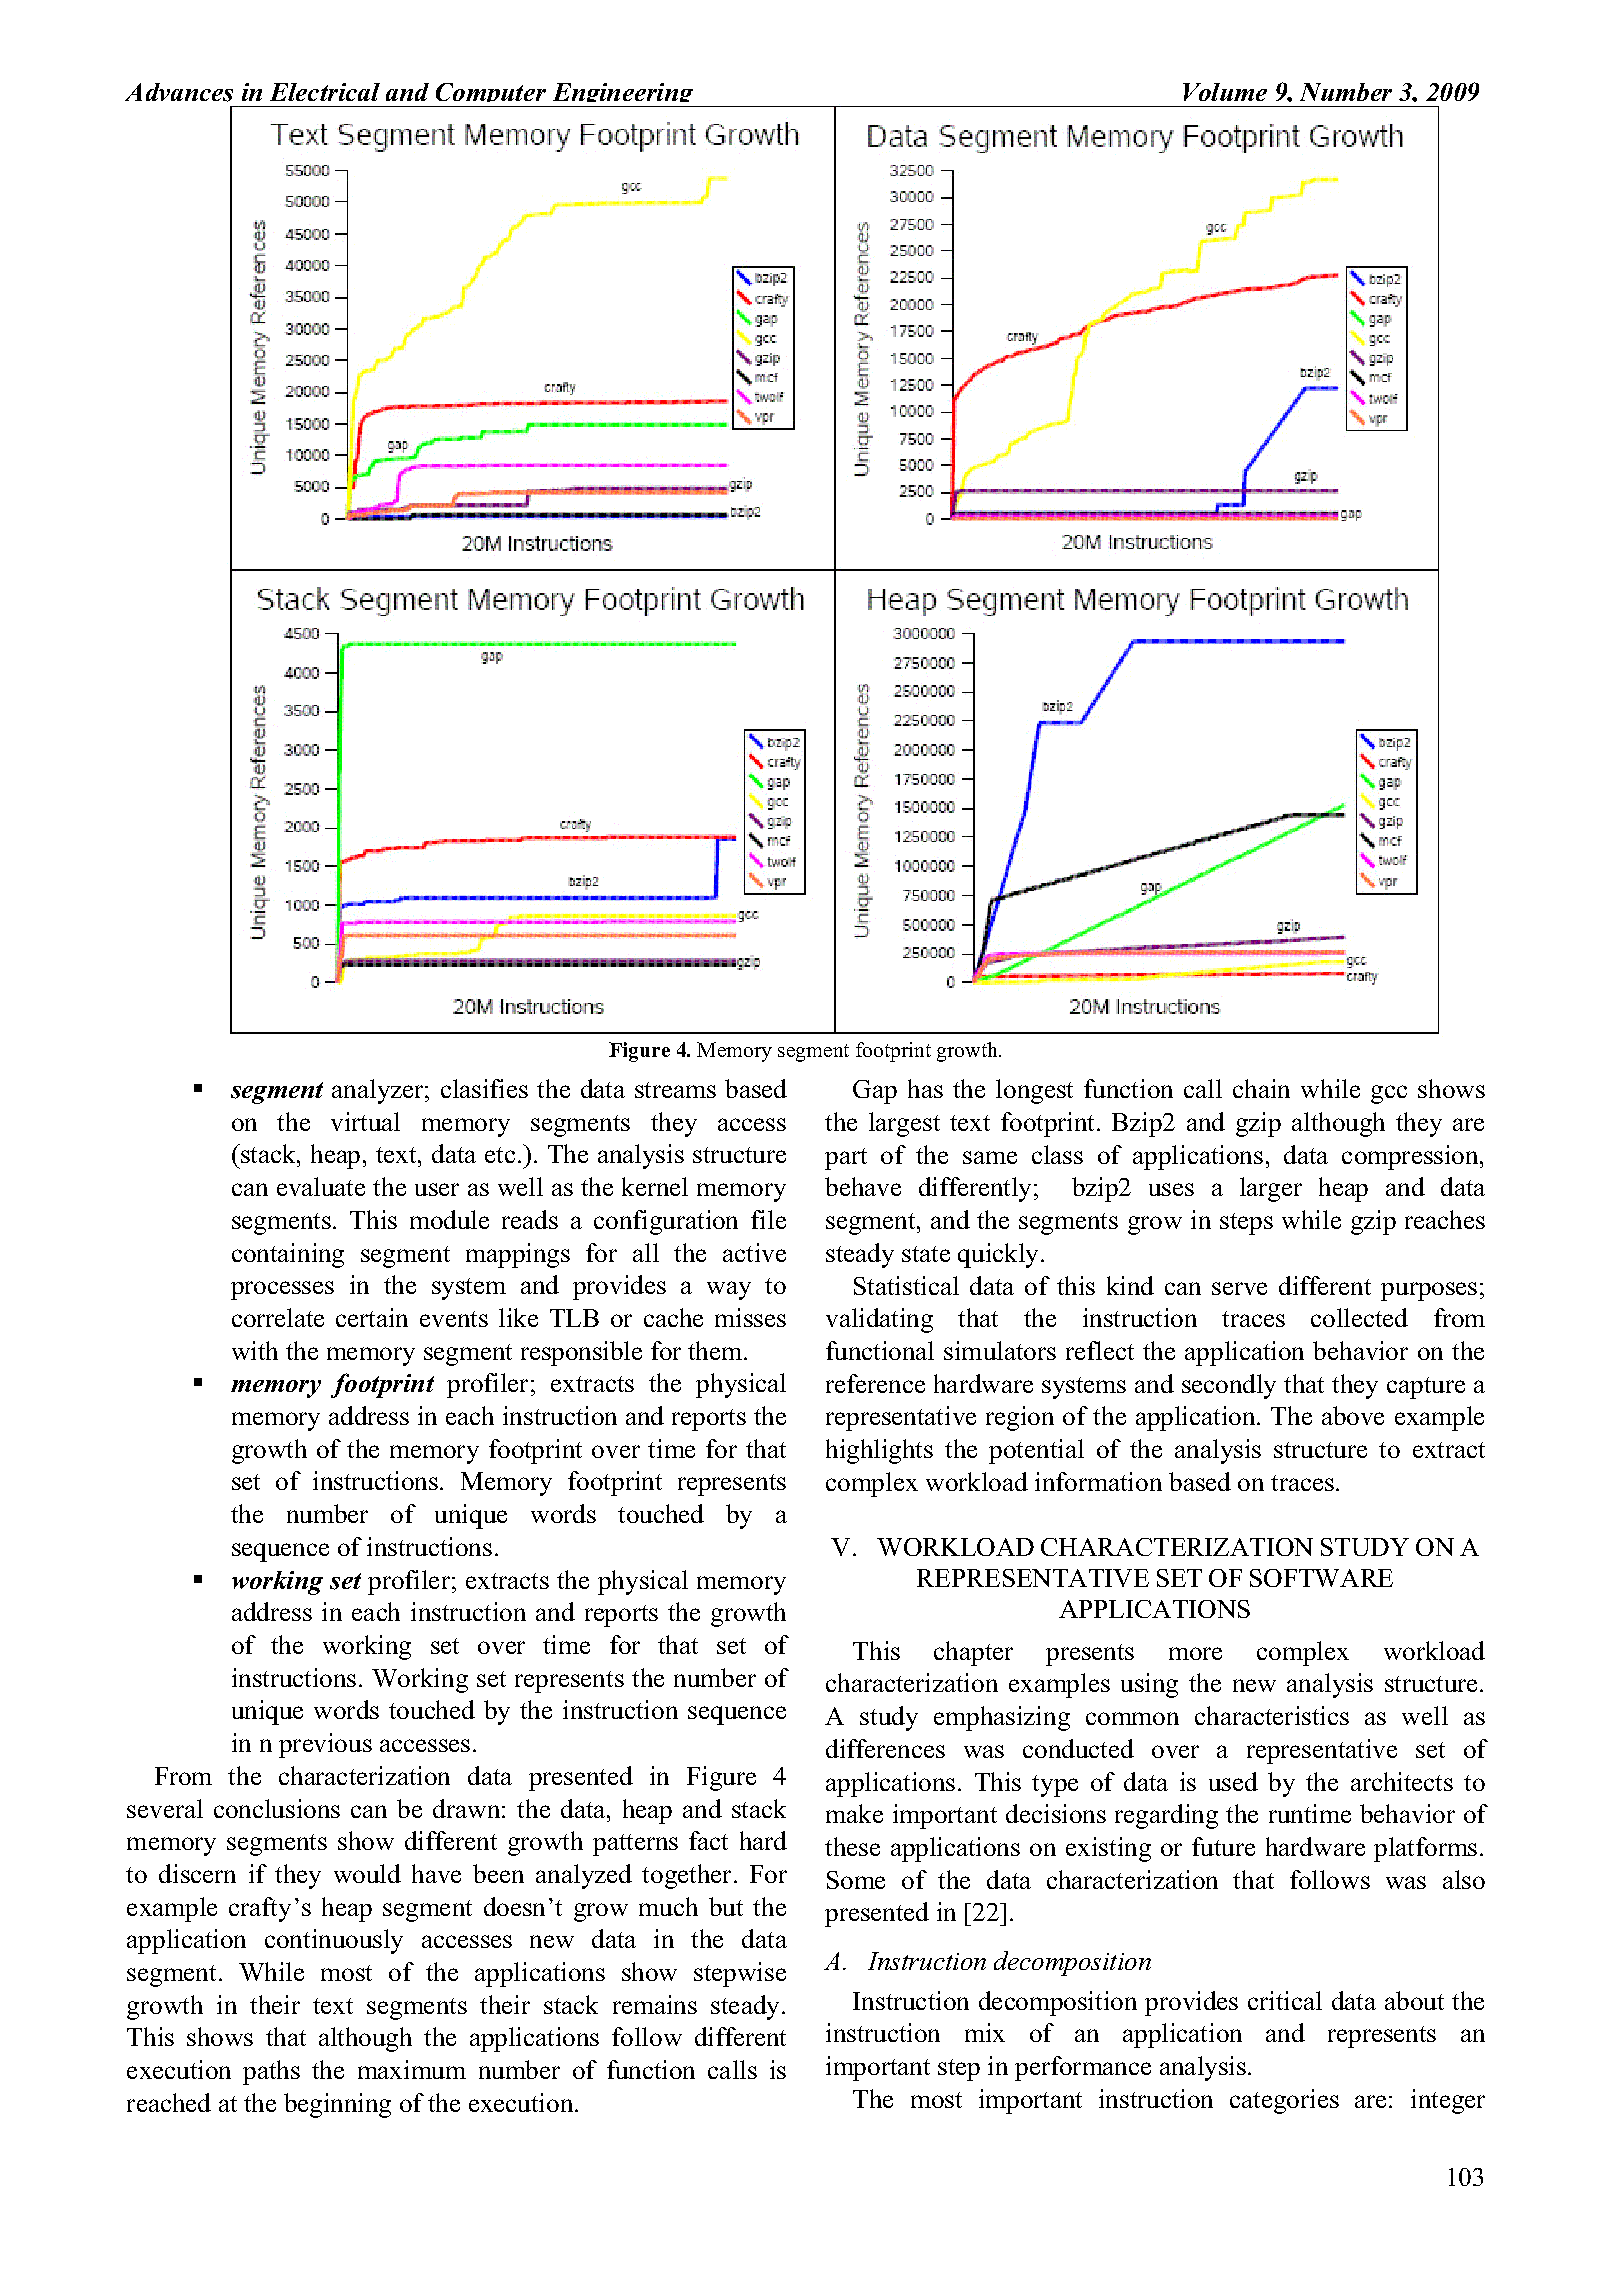 PDF Quickview for paper with DOI:10.4316/AECE.2009.03018